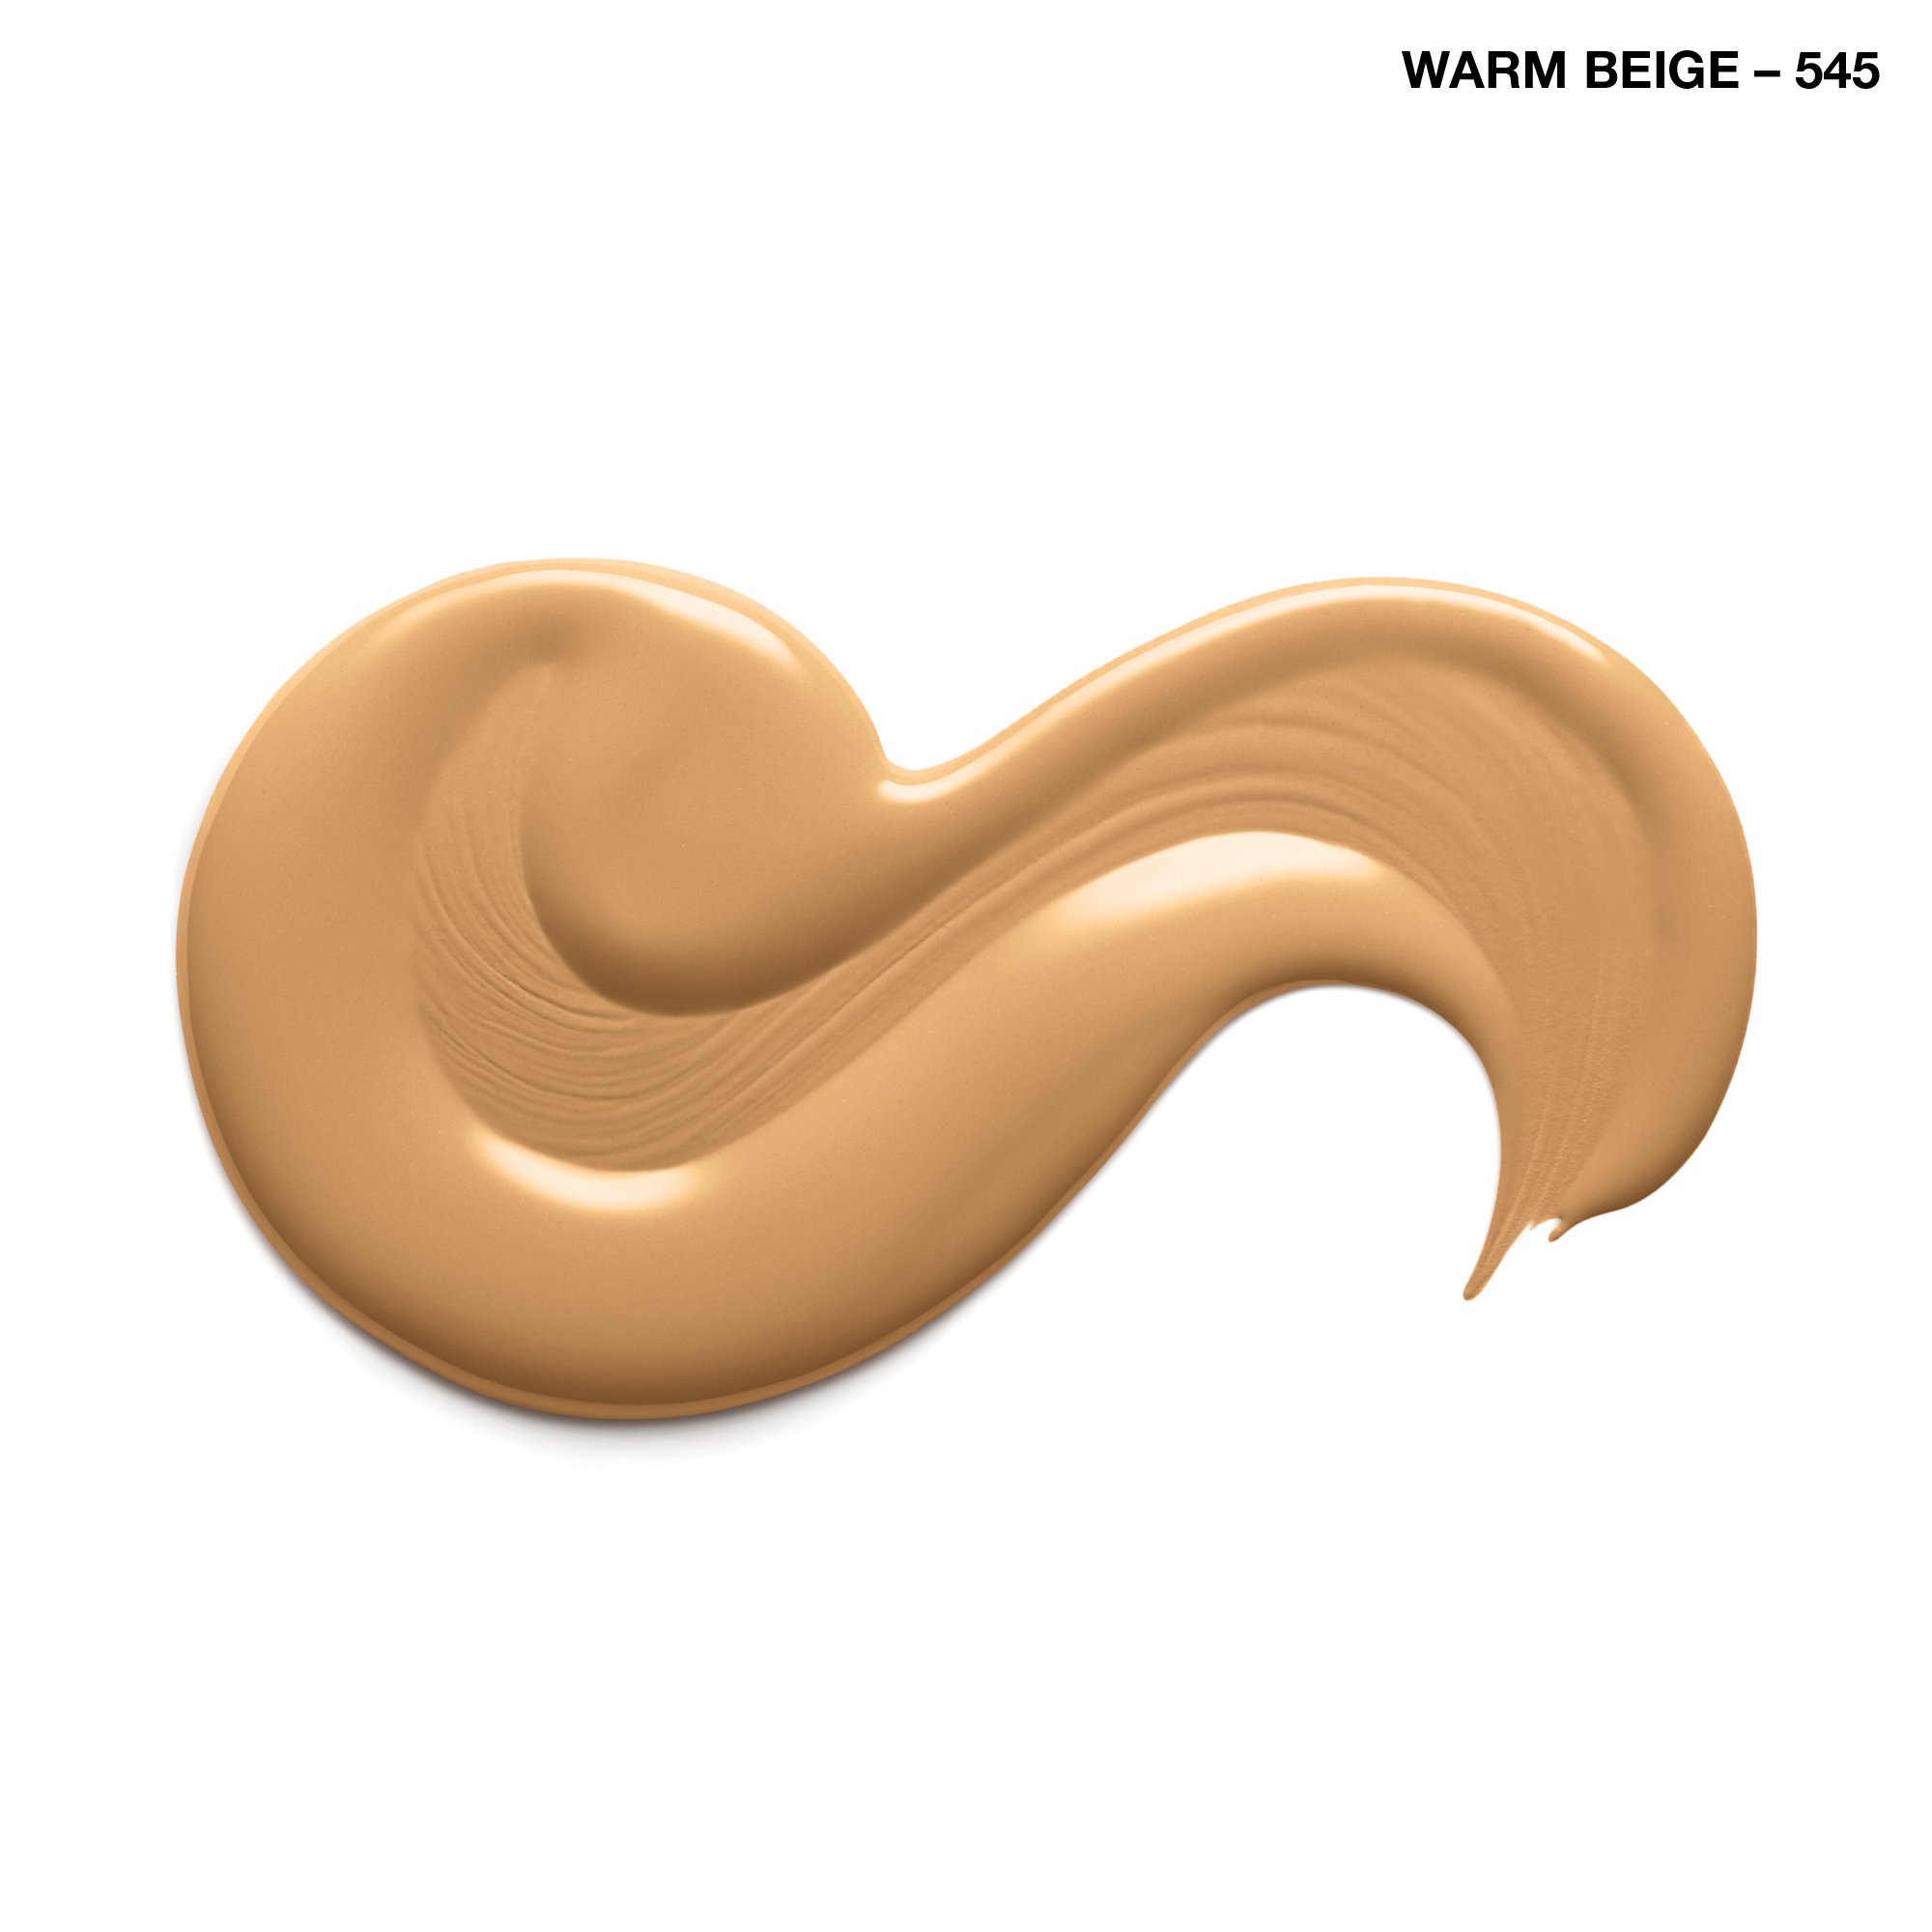 COVERGIRL Clean Matte Liquid Foundation Warm Beige 545, 1 oz (packaging may vary)